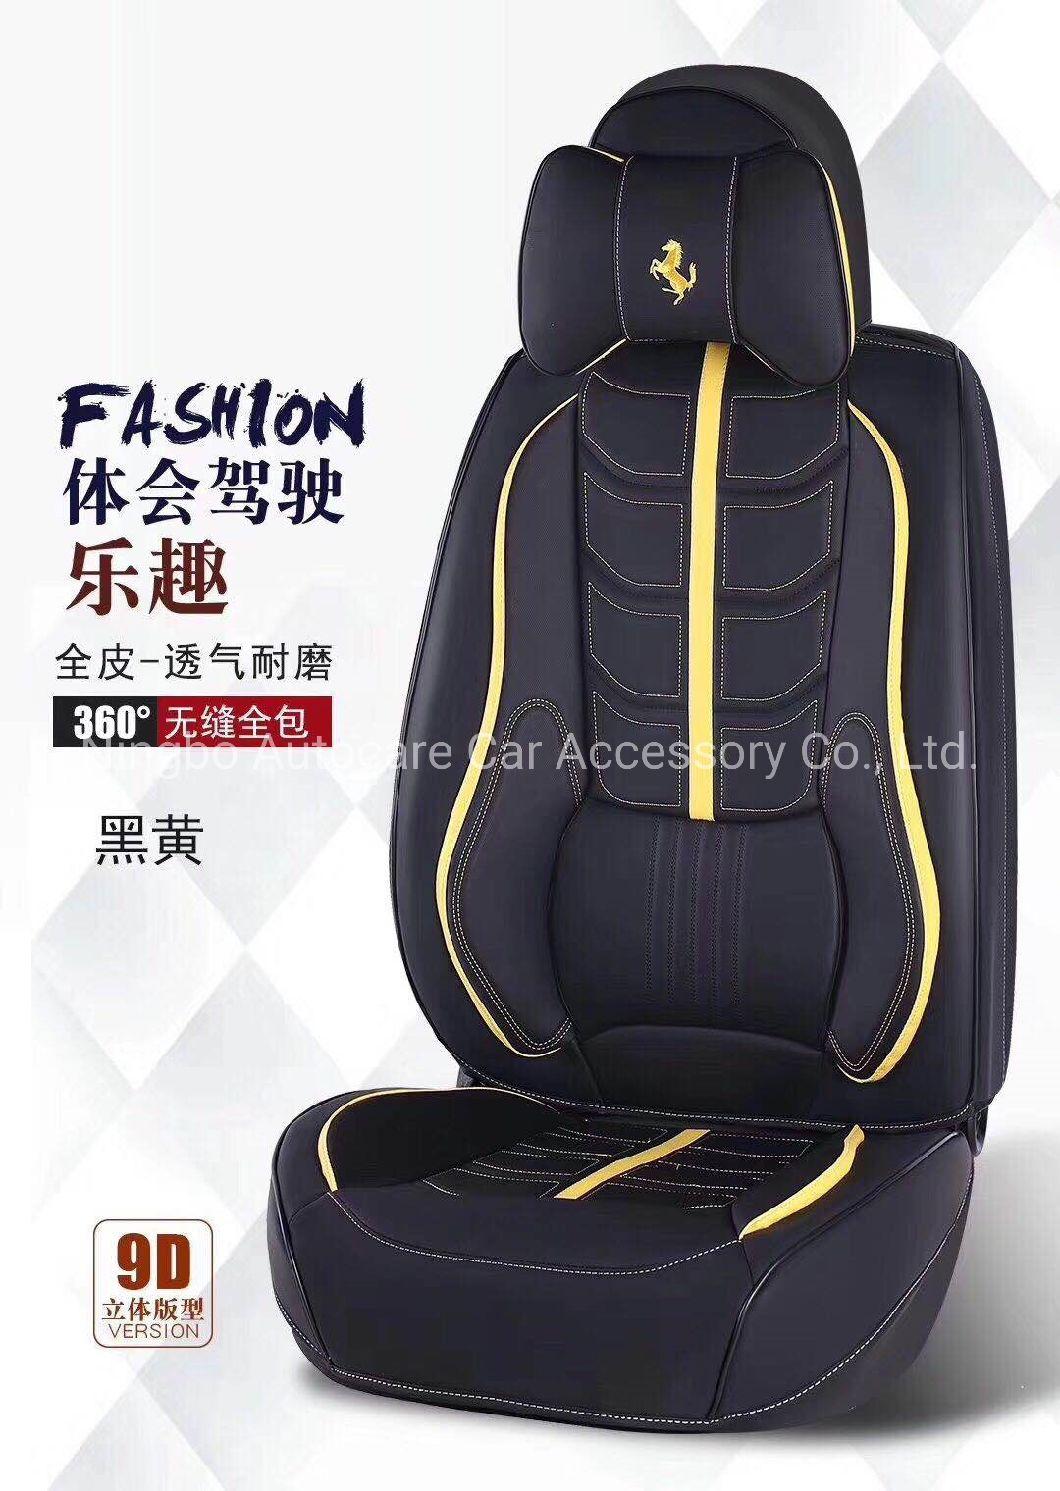 2020 New Fashion Hot Selling Leather 9d Car Seat Cover